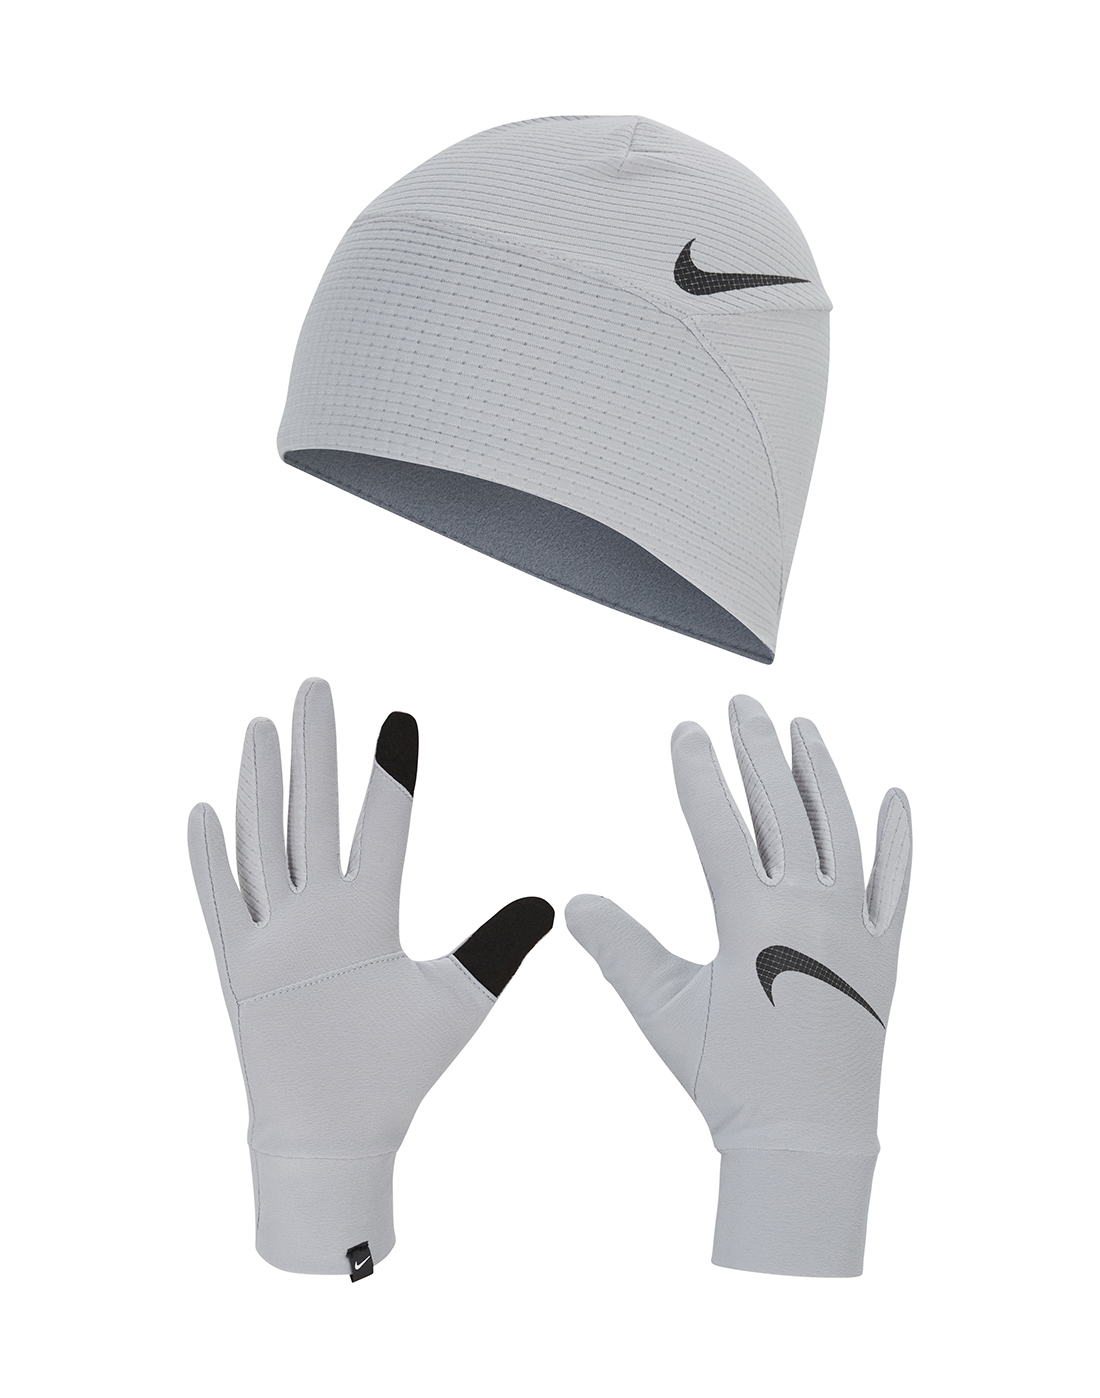 nike running gloves and hat